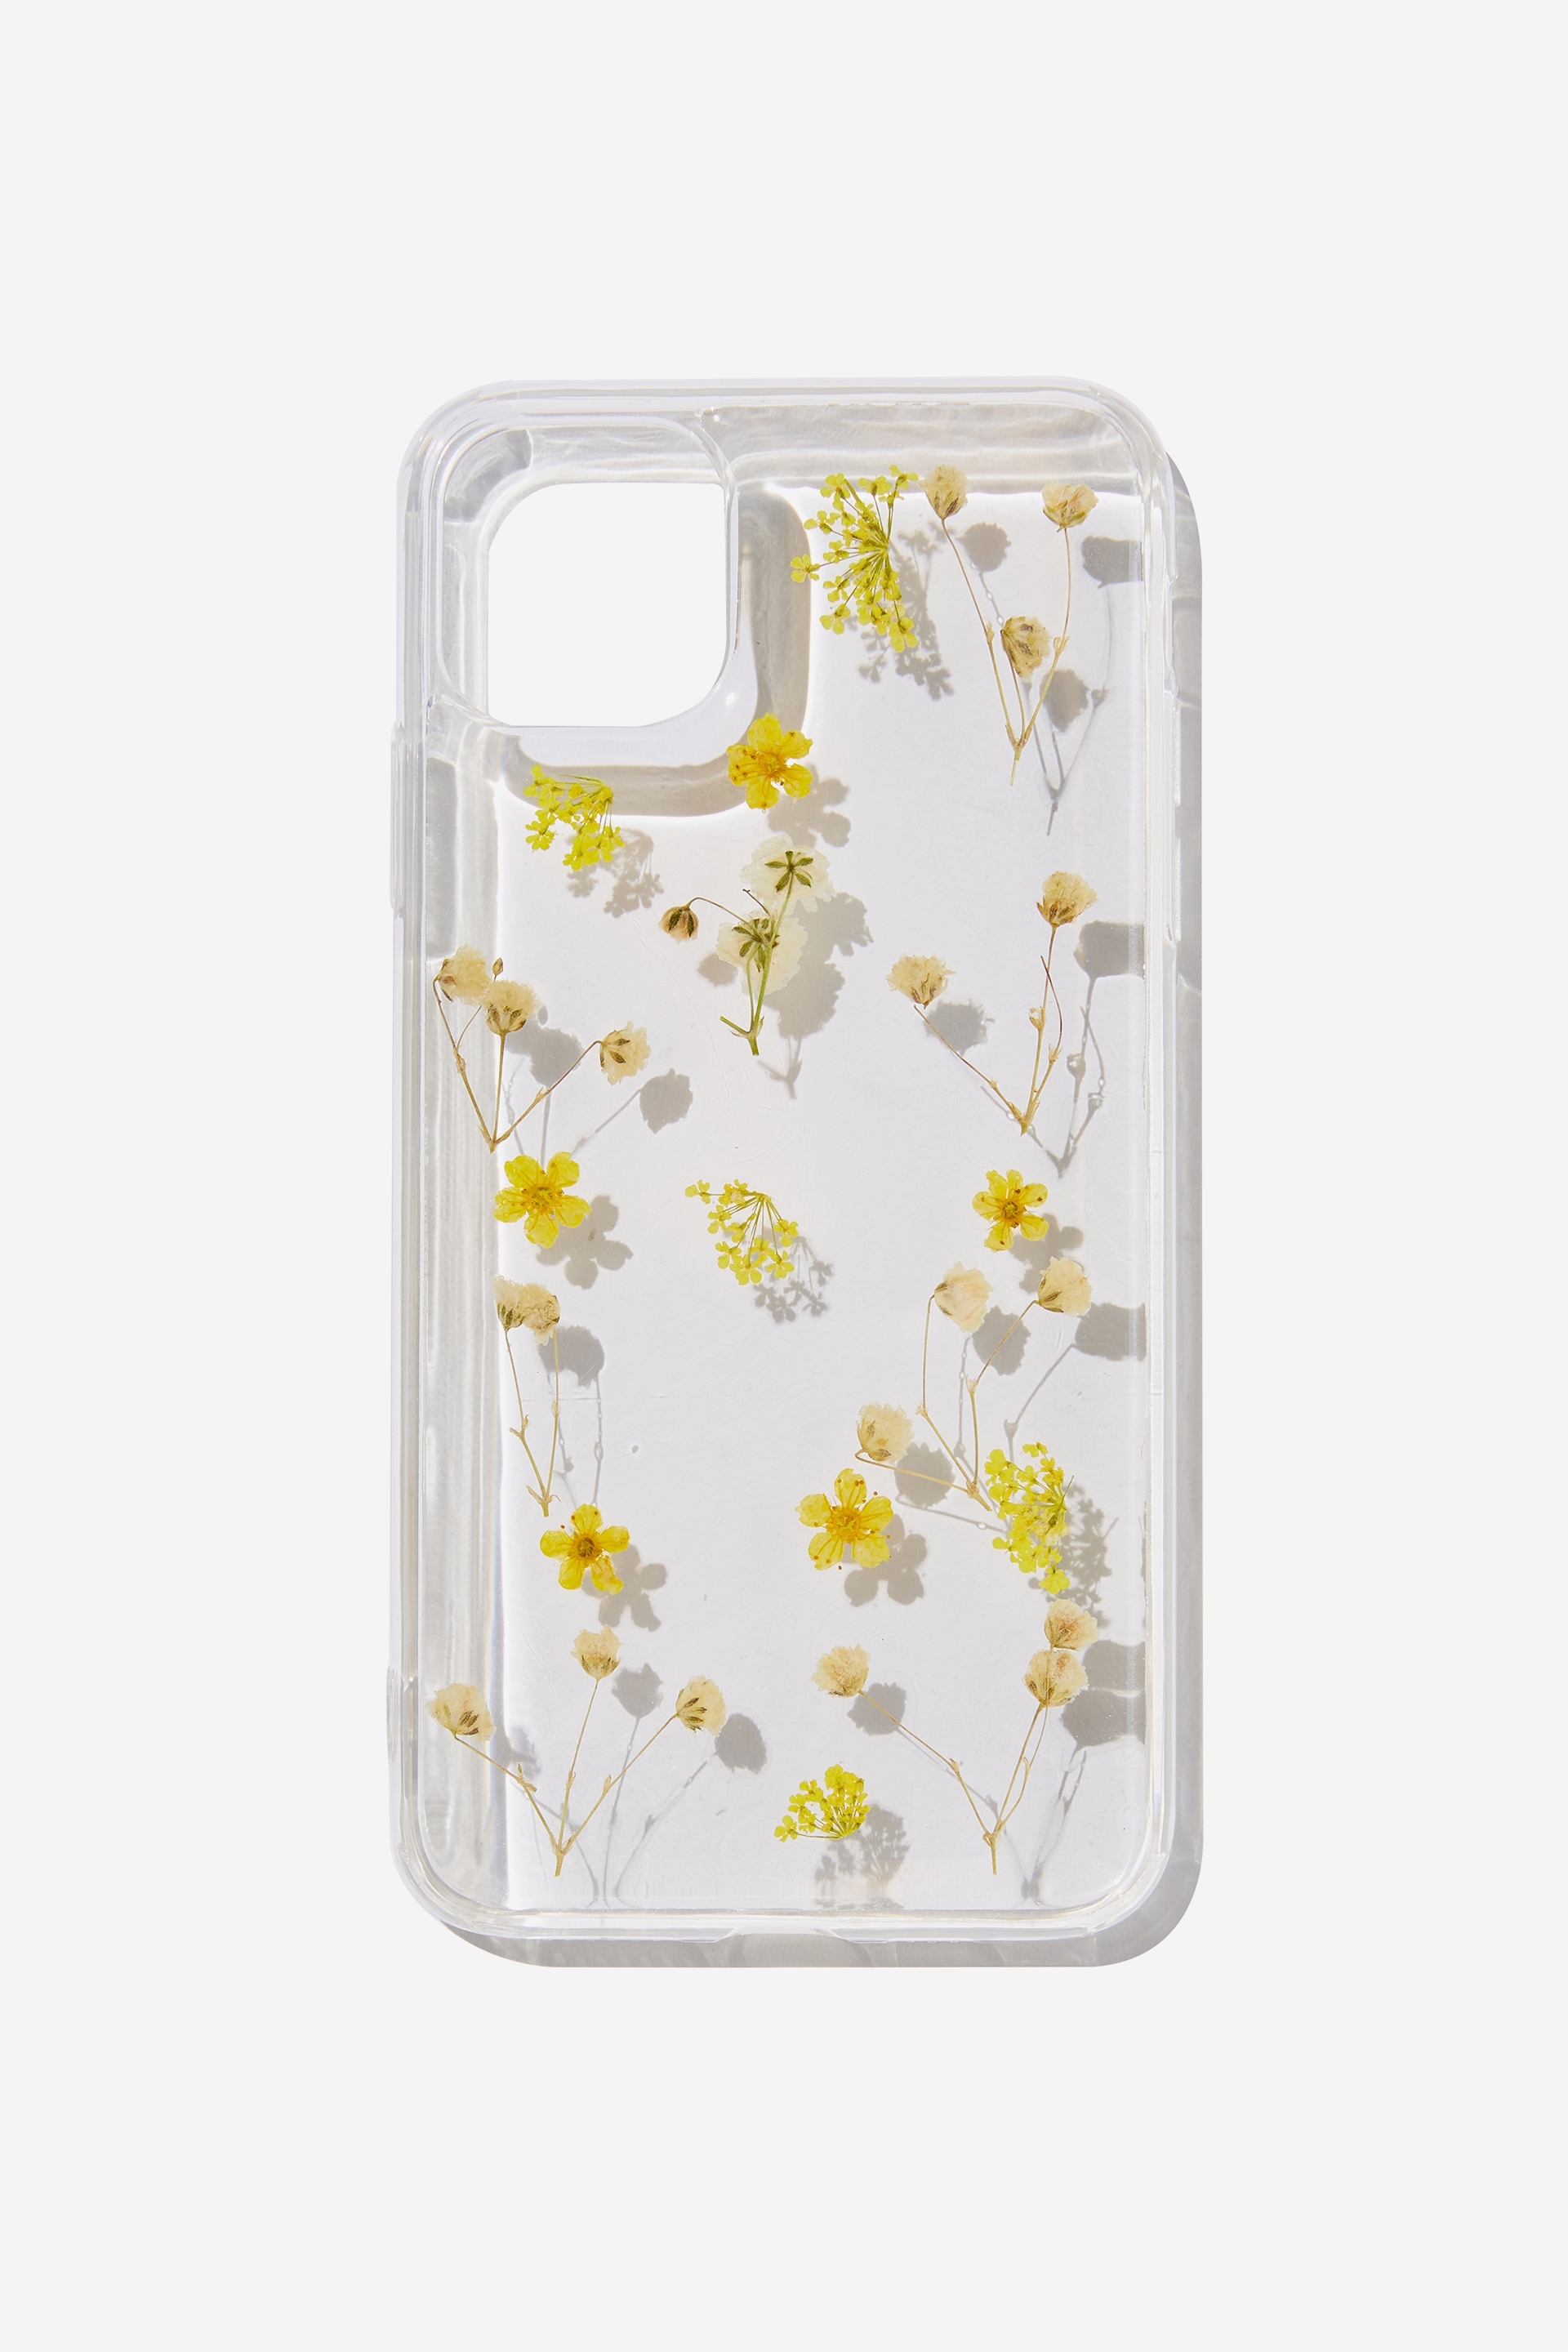 Typo - Protective Phone Case Iphone 11 Pro Max - Trapped micro flowers